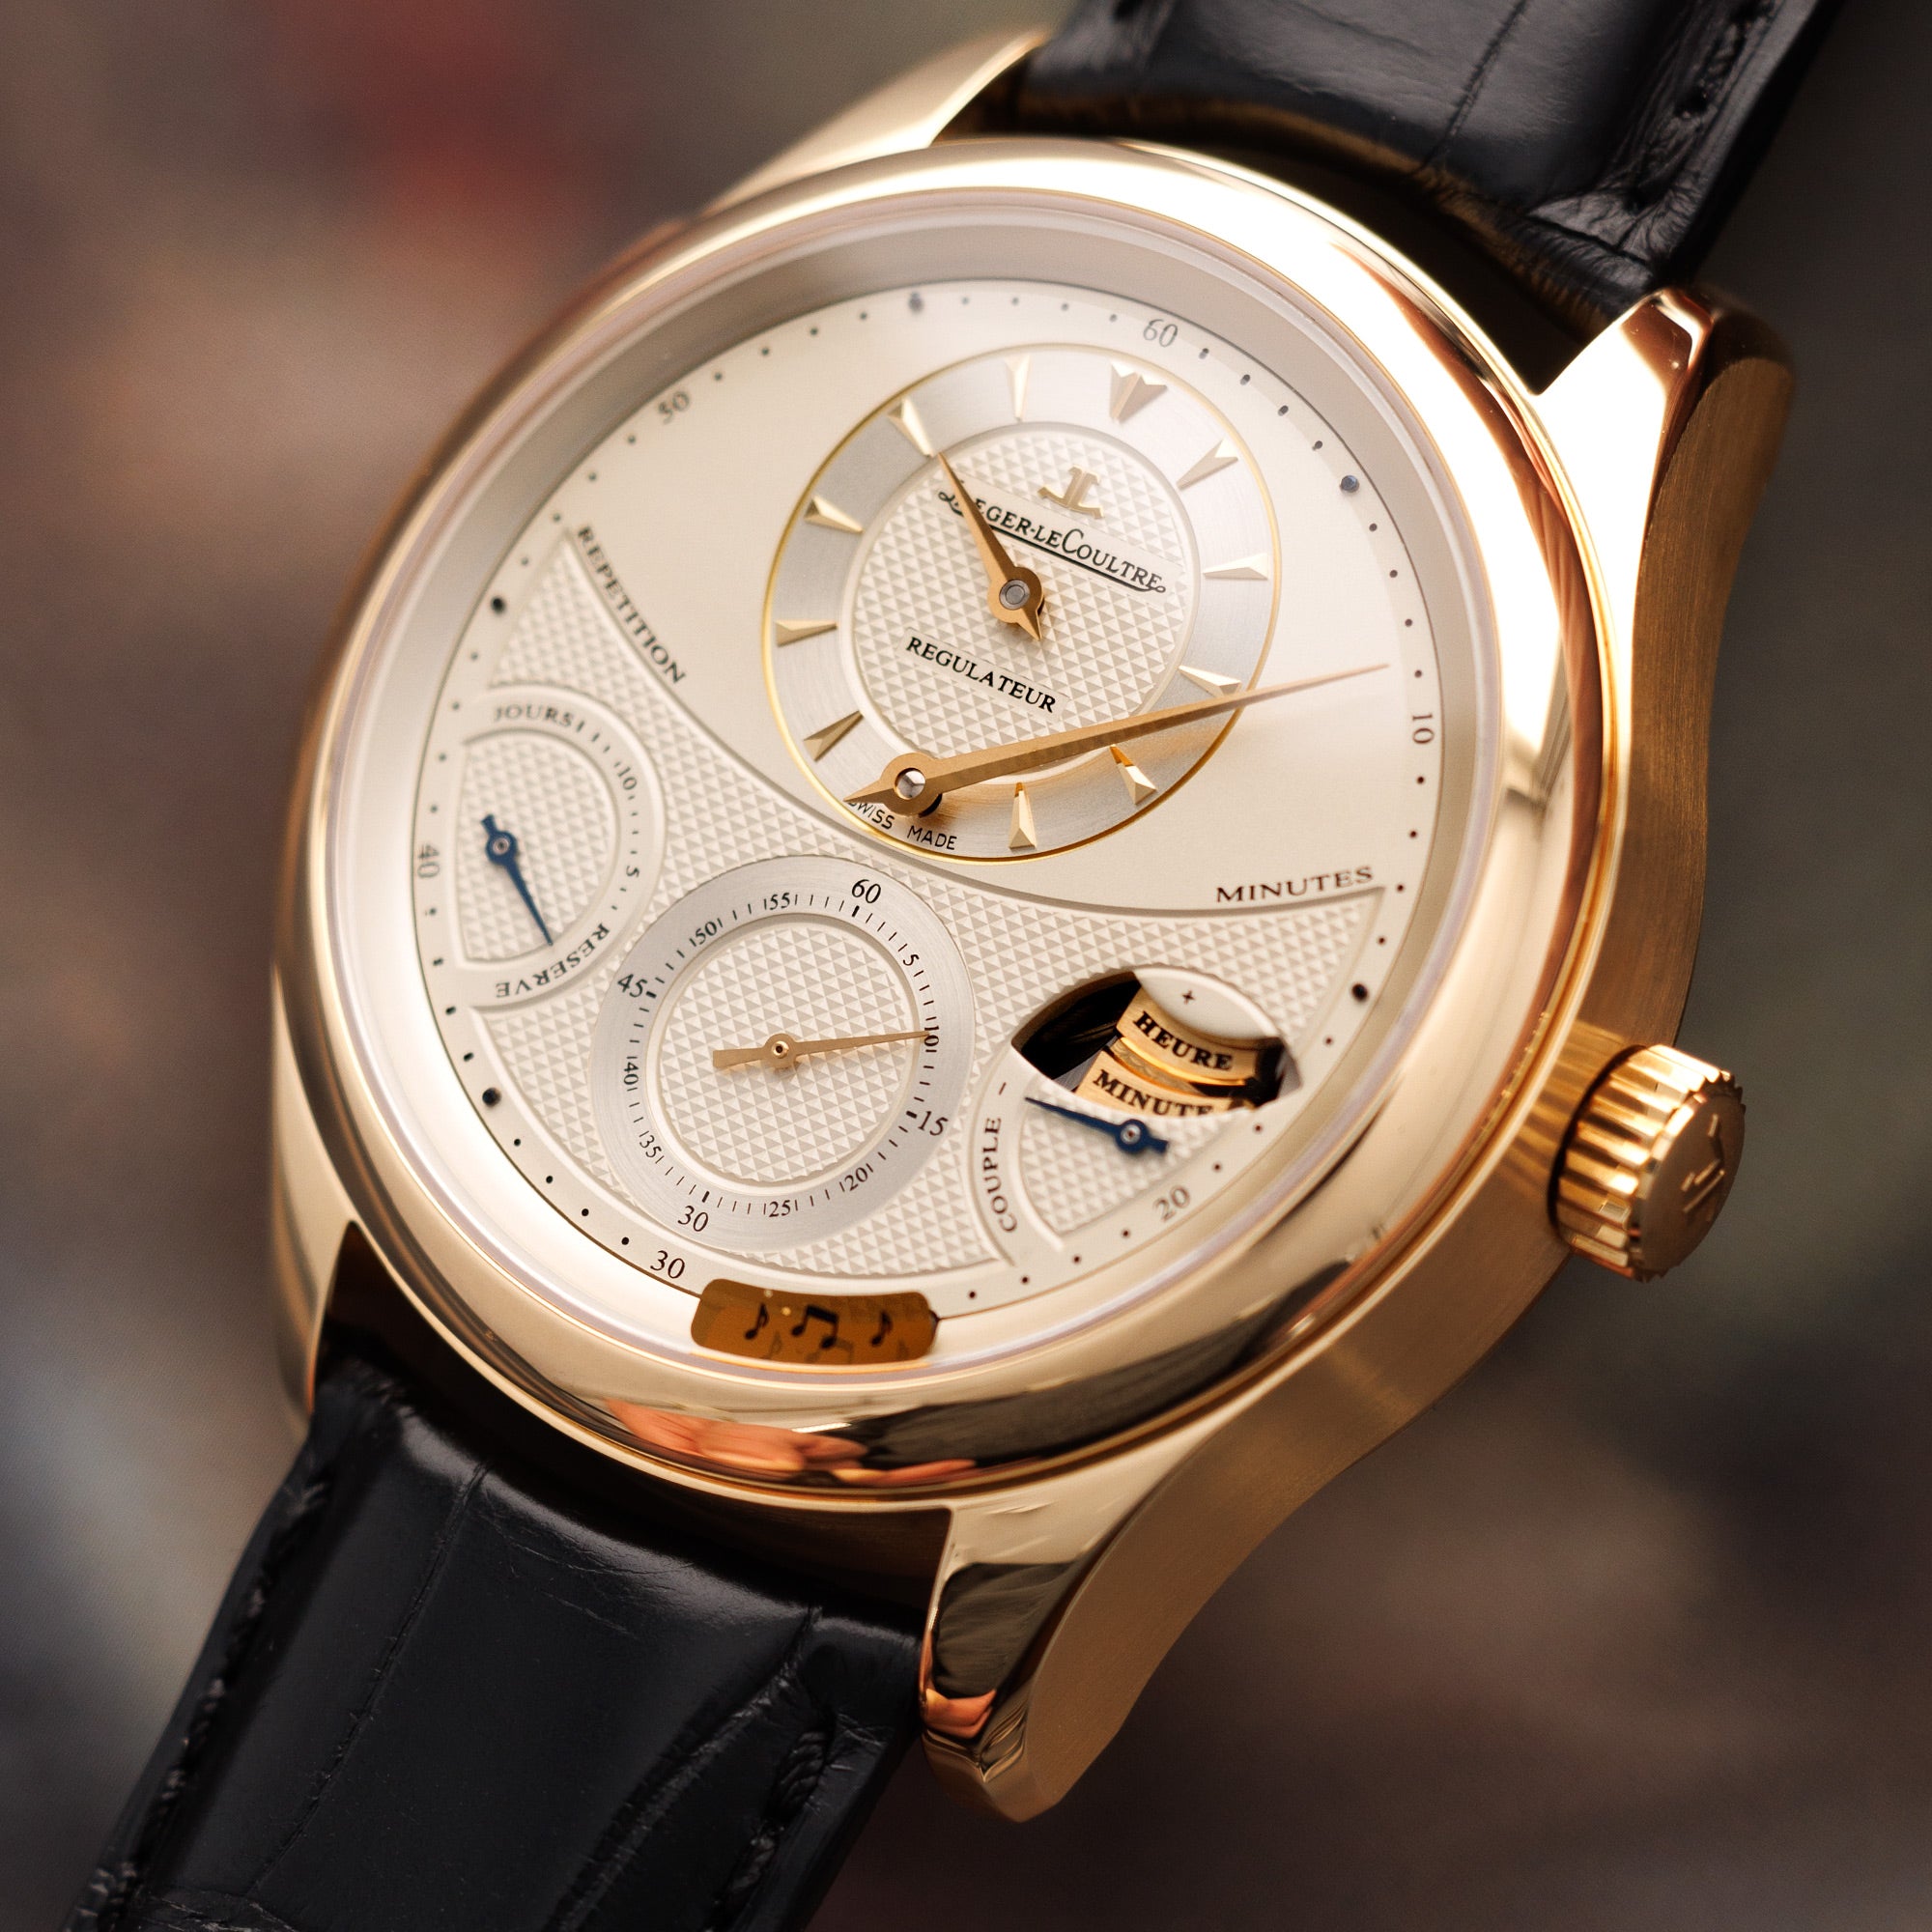 Jaeger LeCoultre - Jaeger LeCoultre Master Grande Minute Repeater Watch Ref. Q5011410, Limited to 100 Pieces - The Keystone Watches